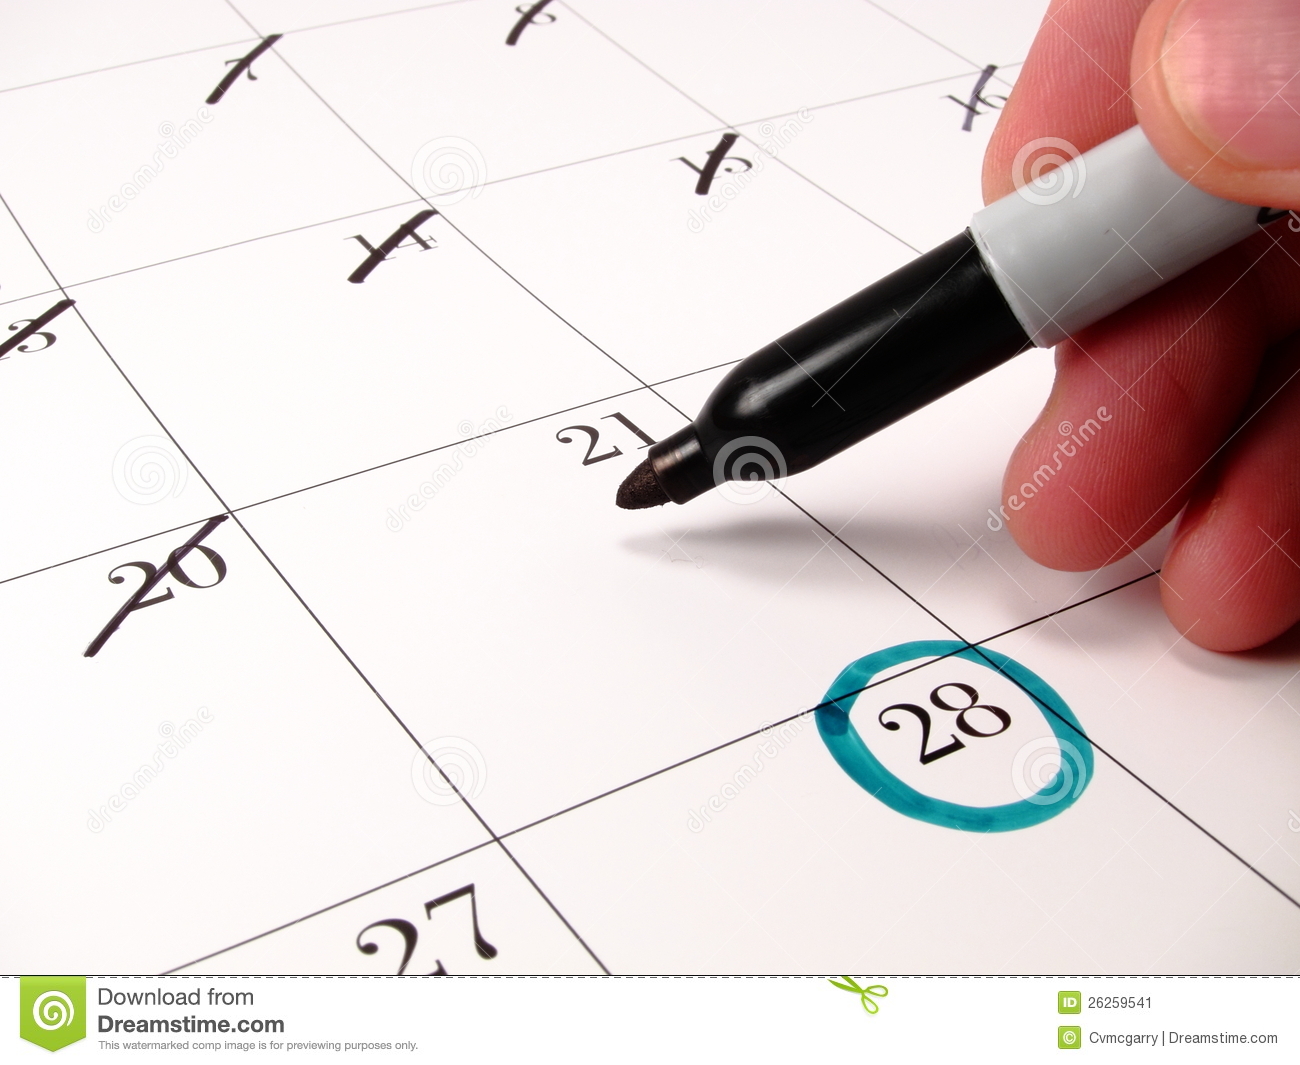 Counting Down The Days With A Calendar Stock Image   Image  26259541